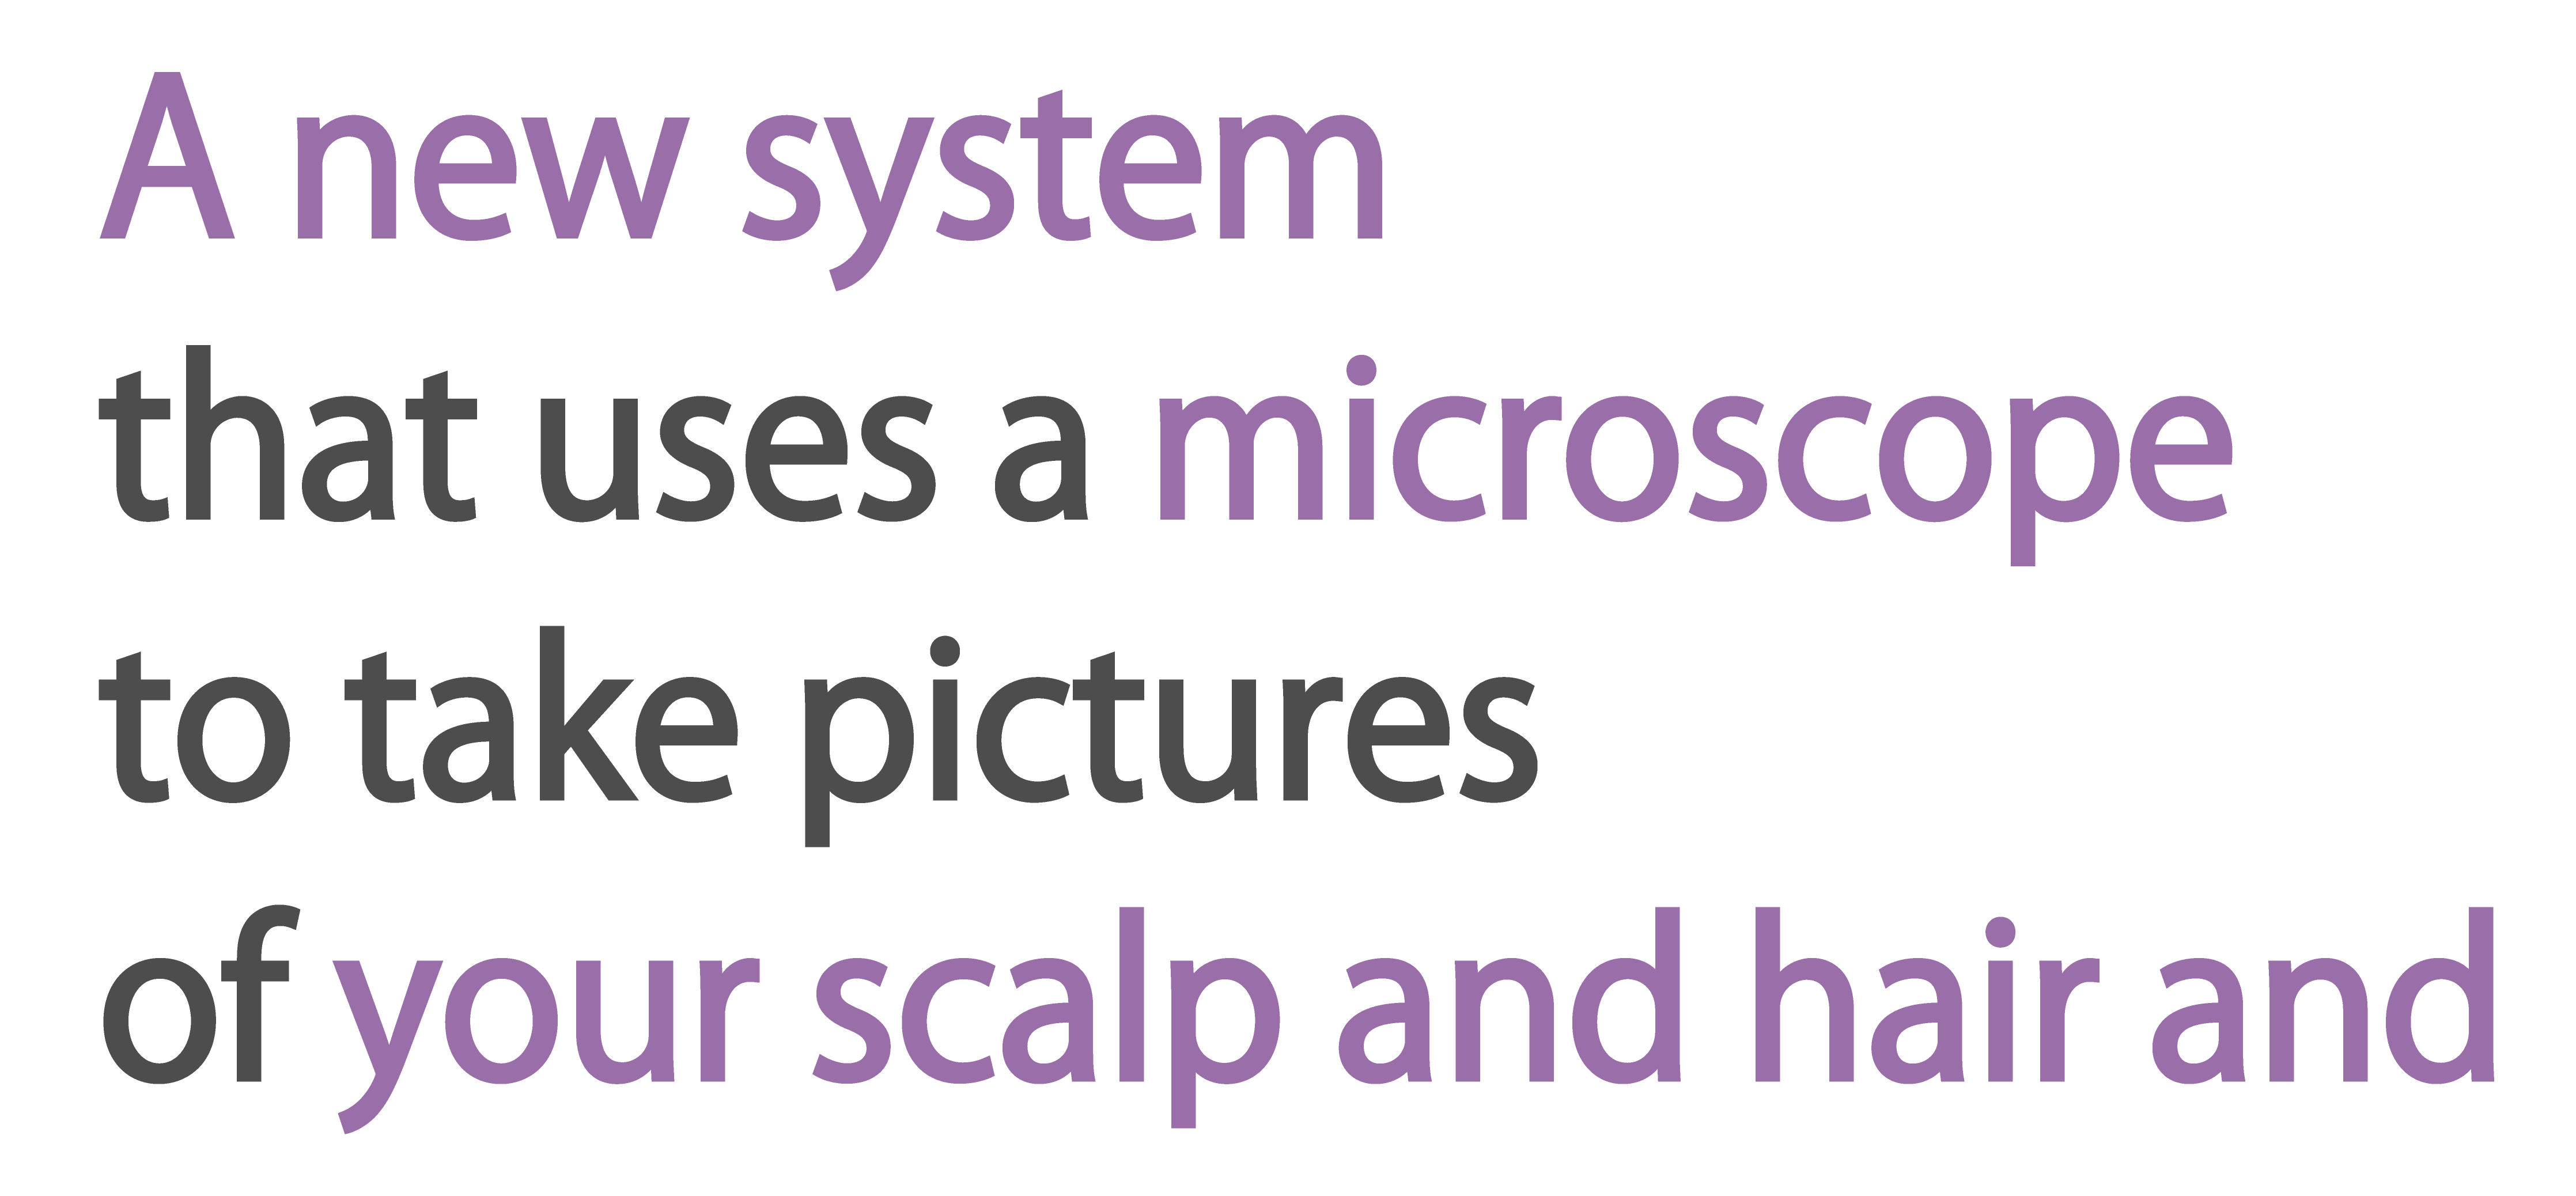 A new system that uses a microscope to take pictures of your scalp and hair and
